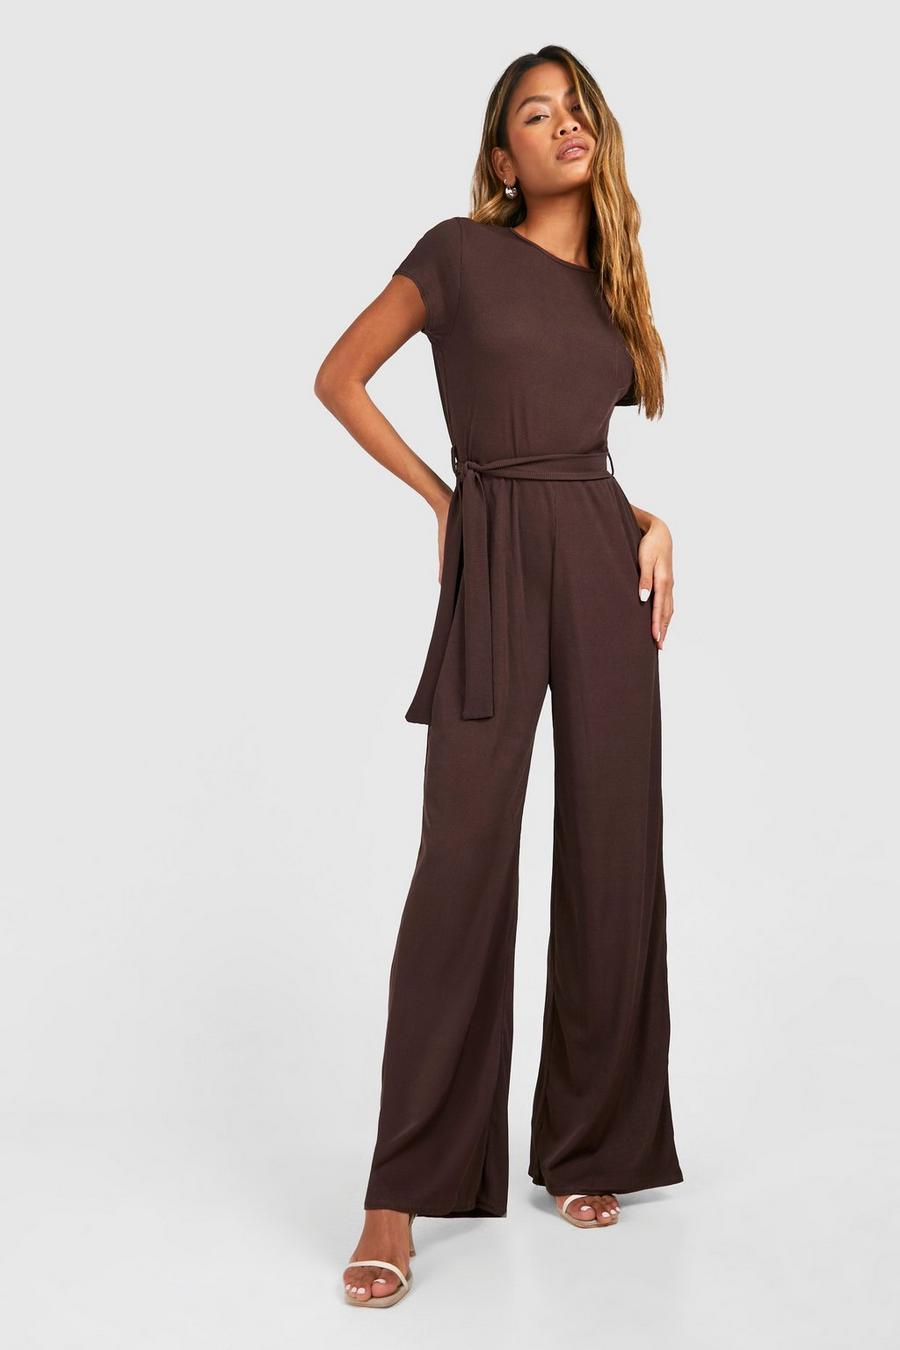 Chocolate Slouchy Belted Soft Rib Jumpsuit